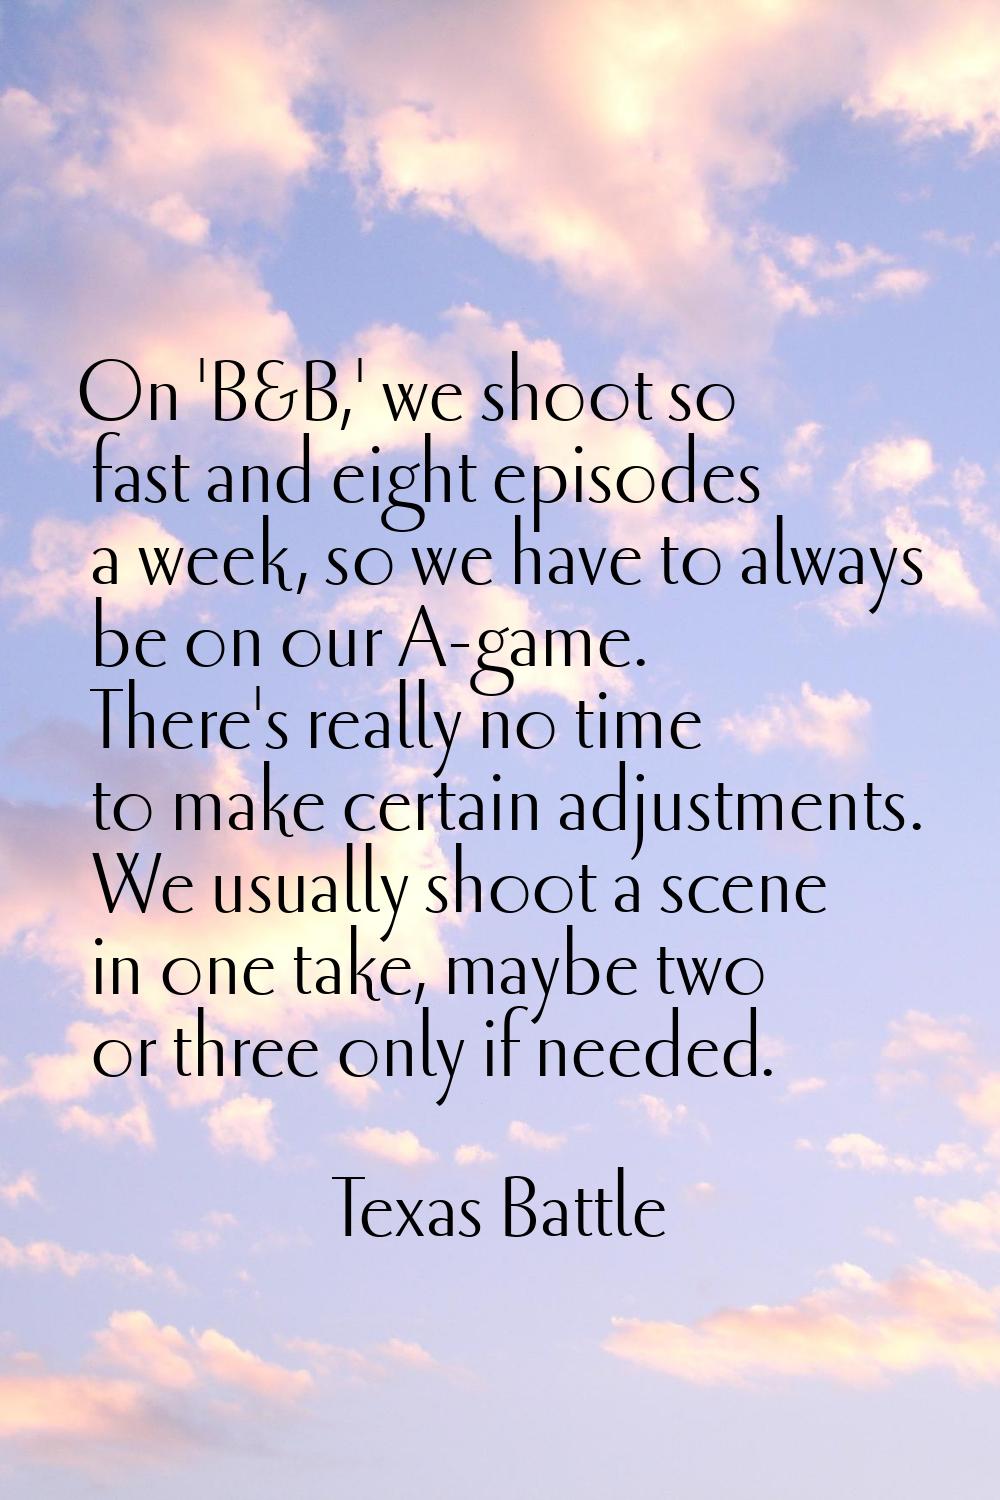 On 'B&B,' we shoot so fast and eight episodes a week, so we have to always be on our A-game. There'